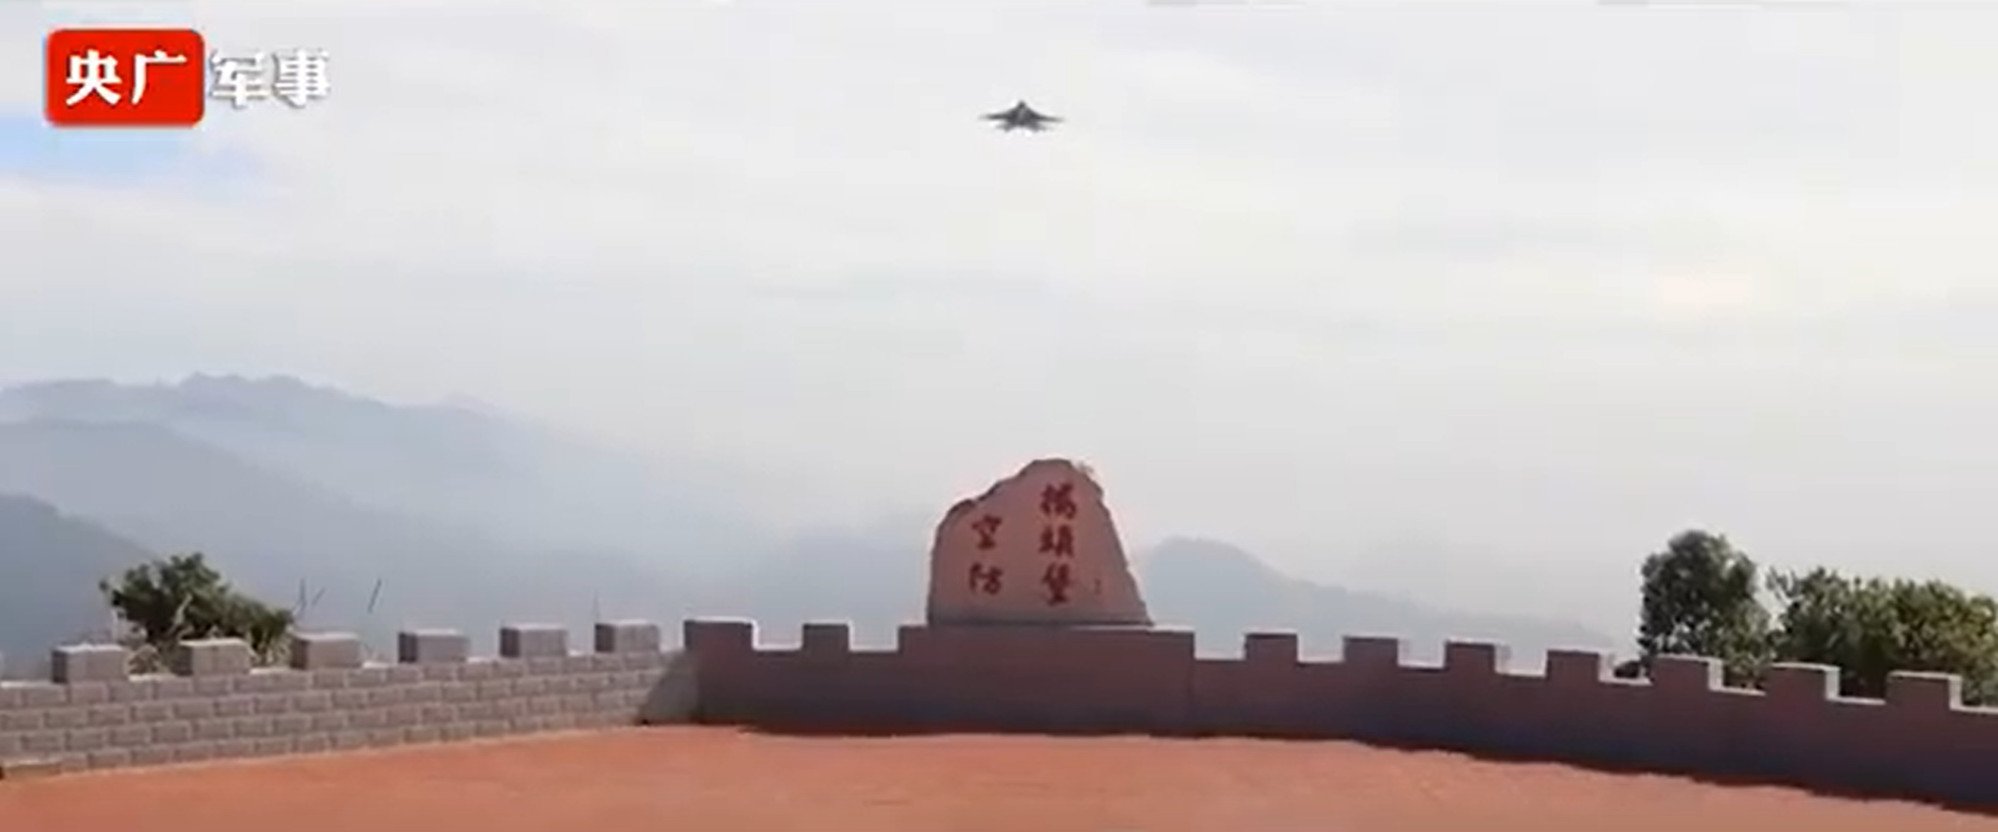 In March 2021, CCTV video footage showing all-weather flight training suggested a flying brigade based in eastern Liaoning province flew fighter jets to land at Ningde airbase in Fujian province. Photo: YouTube